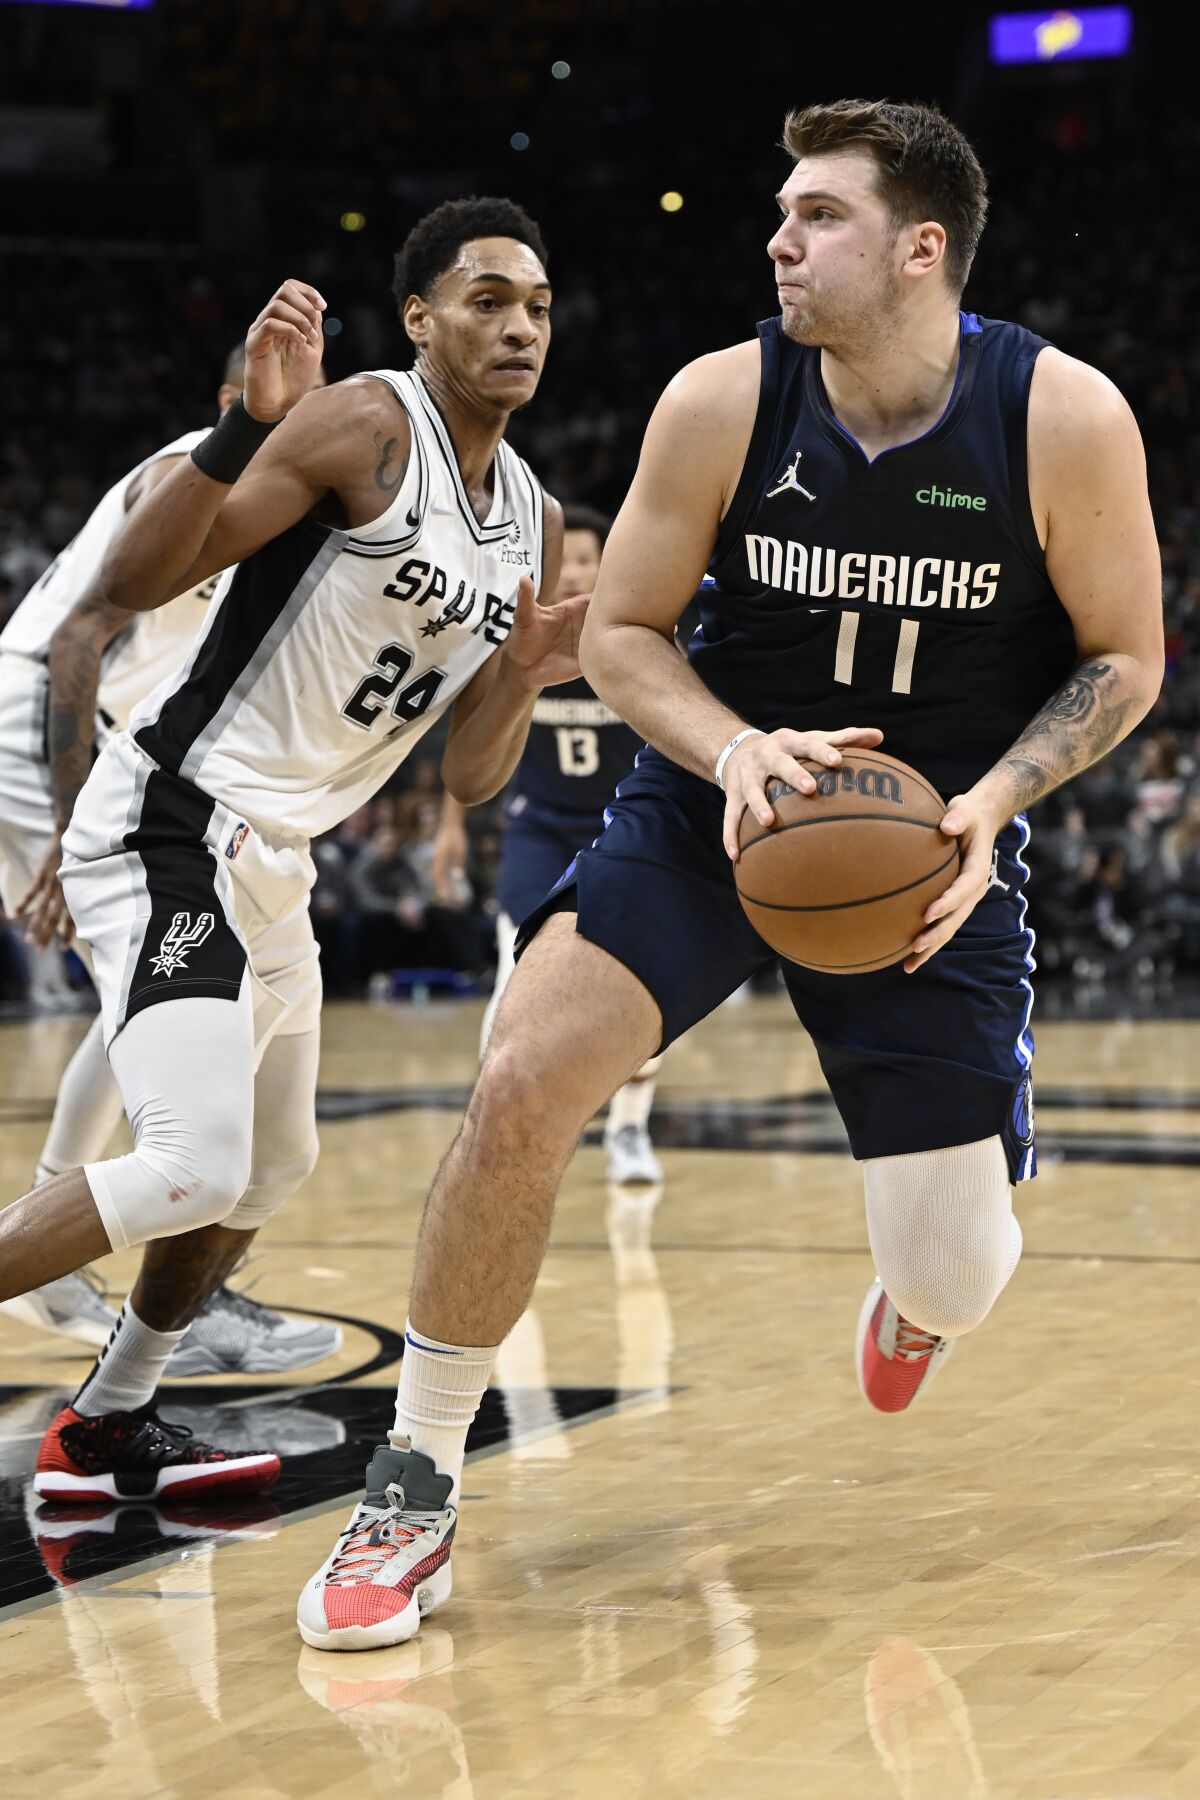 Dallas Mavericks' Luka Doncic, right, drives against San Antonio Spurs' Devin Vassell during the first half of an NBA basketball game on Wednesday, Nov. 3, 2021, in San Antonio. (AP Photo/Darren Abate)